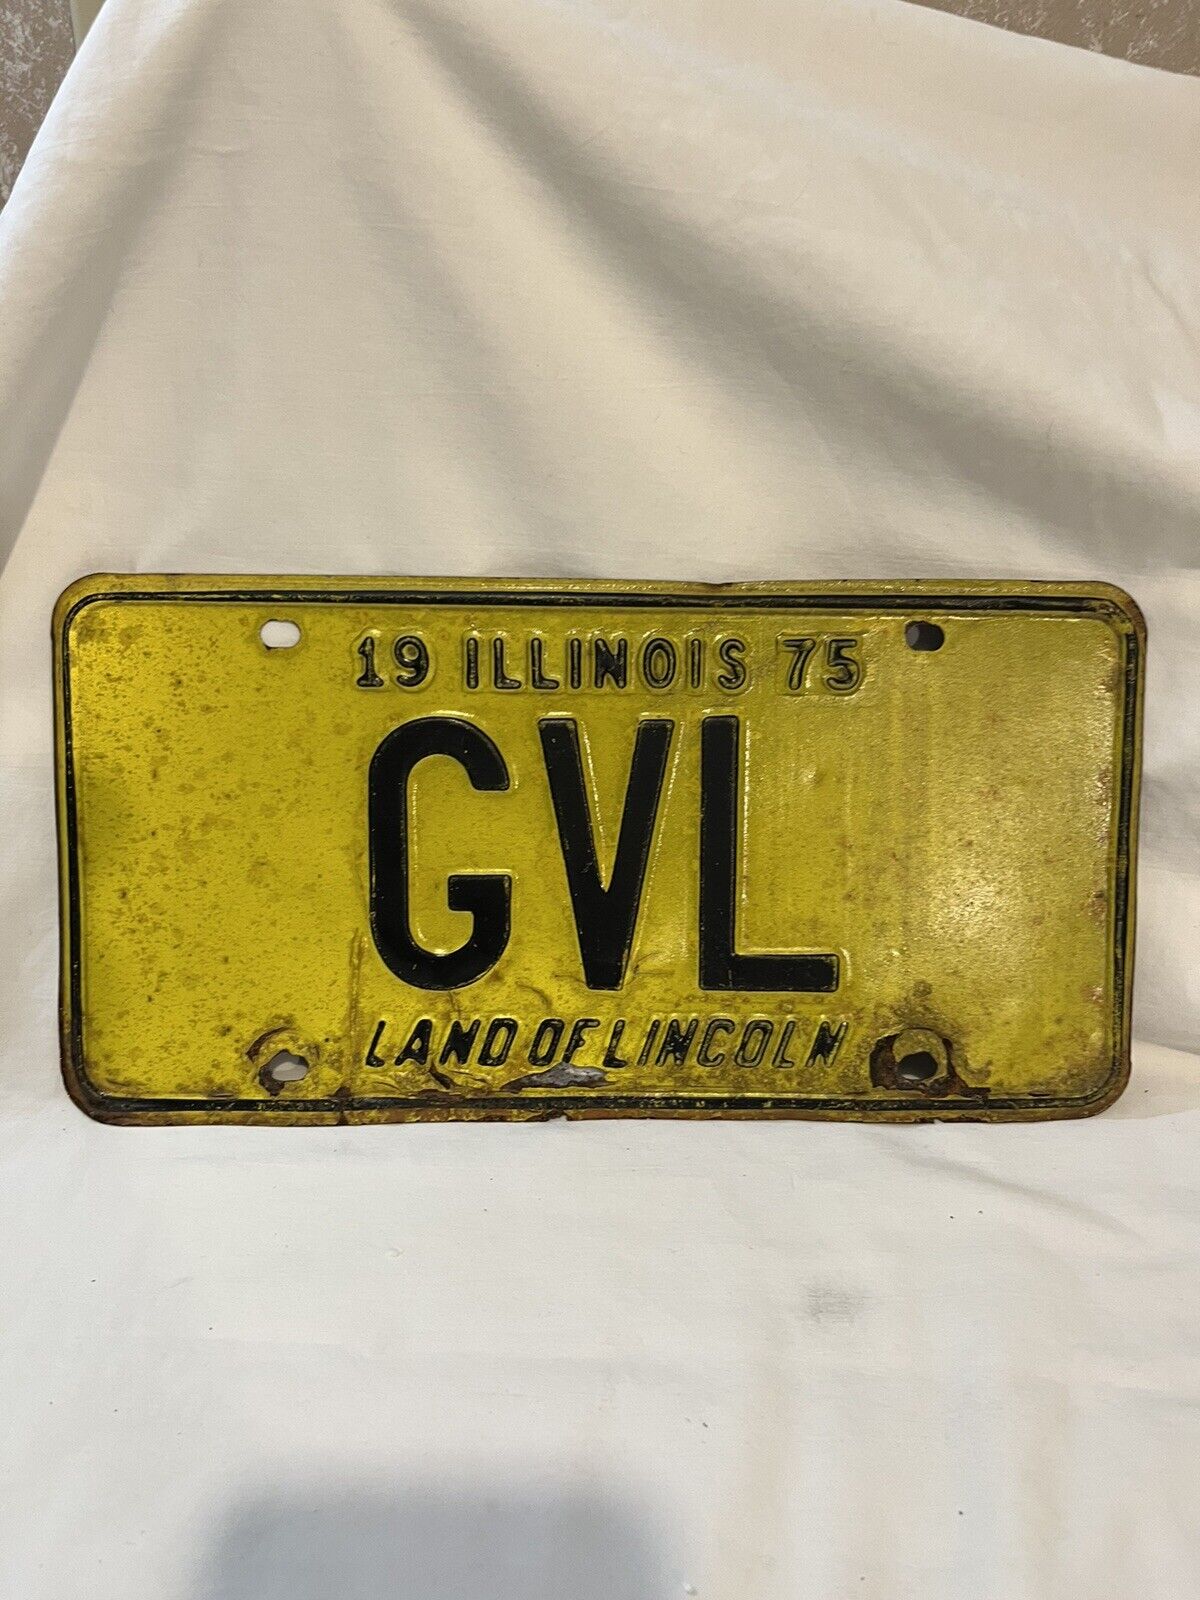 Vintage License Plate GVL Illinois 1975 Land of Lincoln